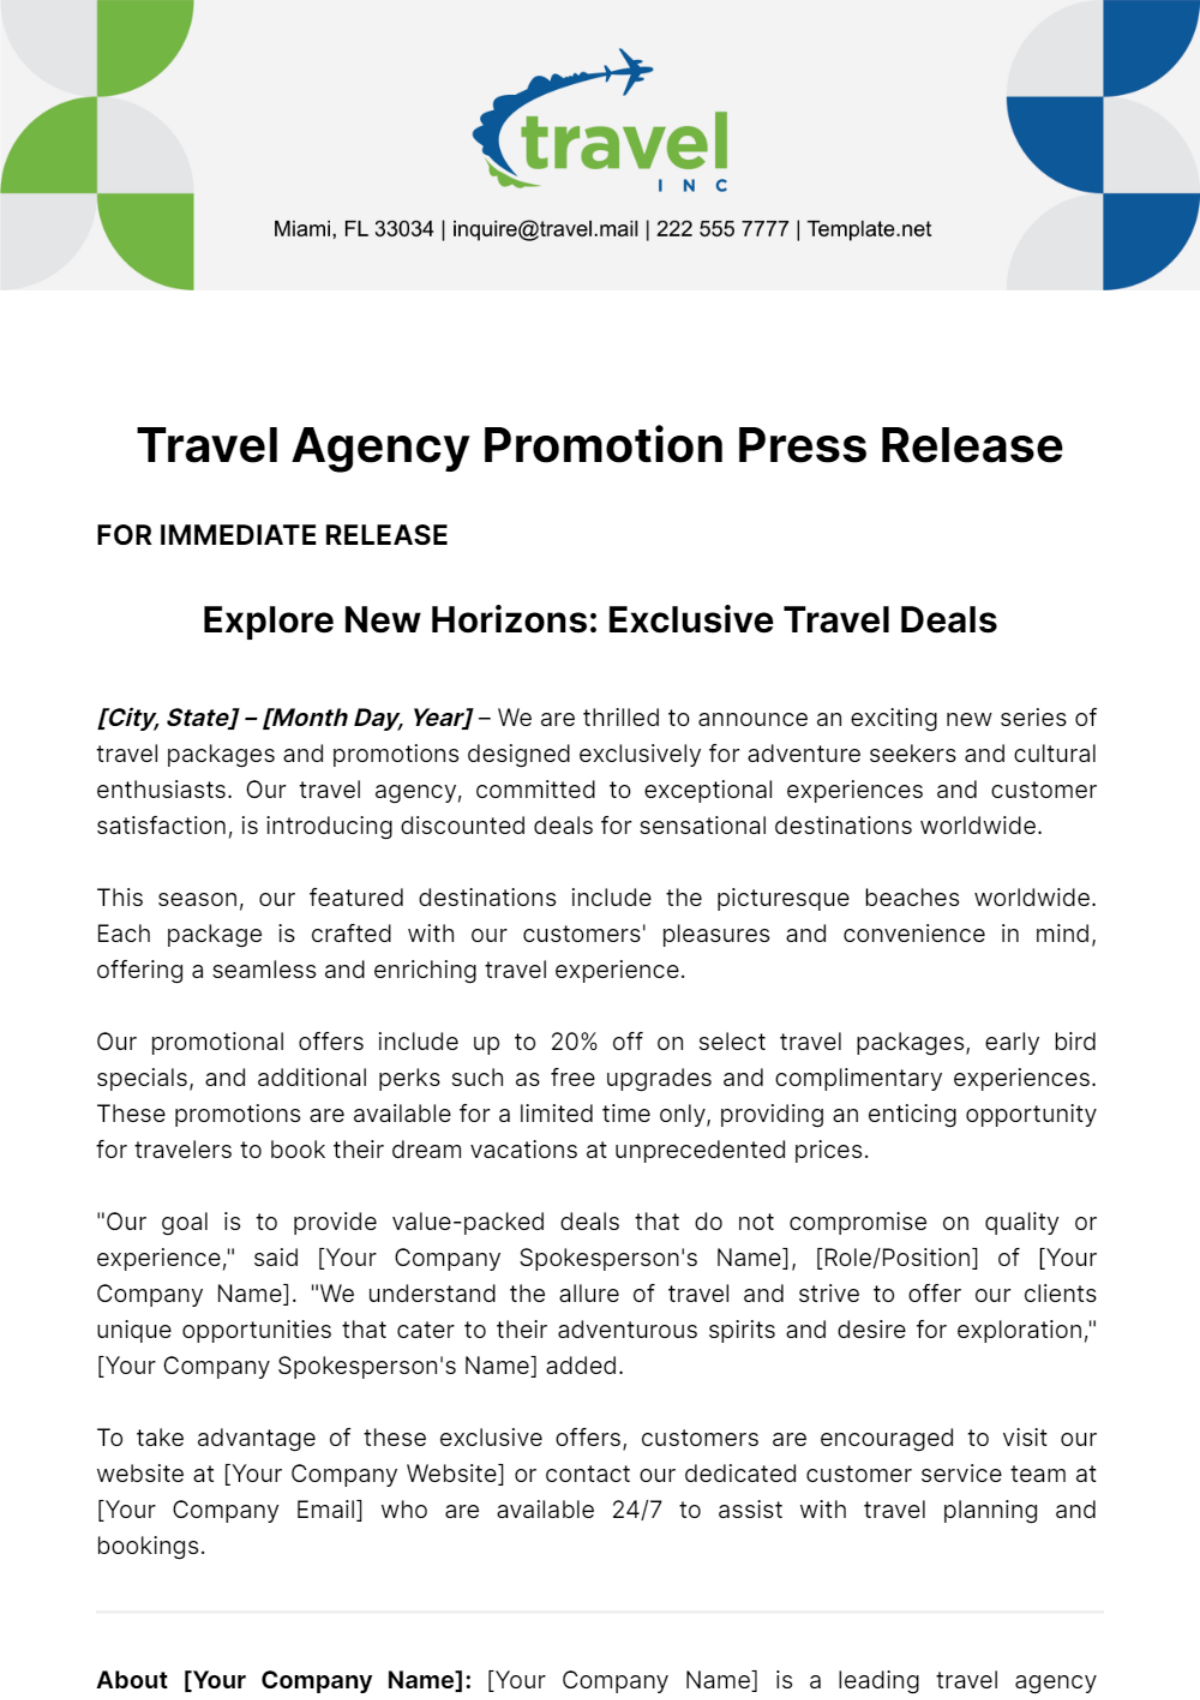 Travel Agency Promotion Press Release Template